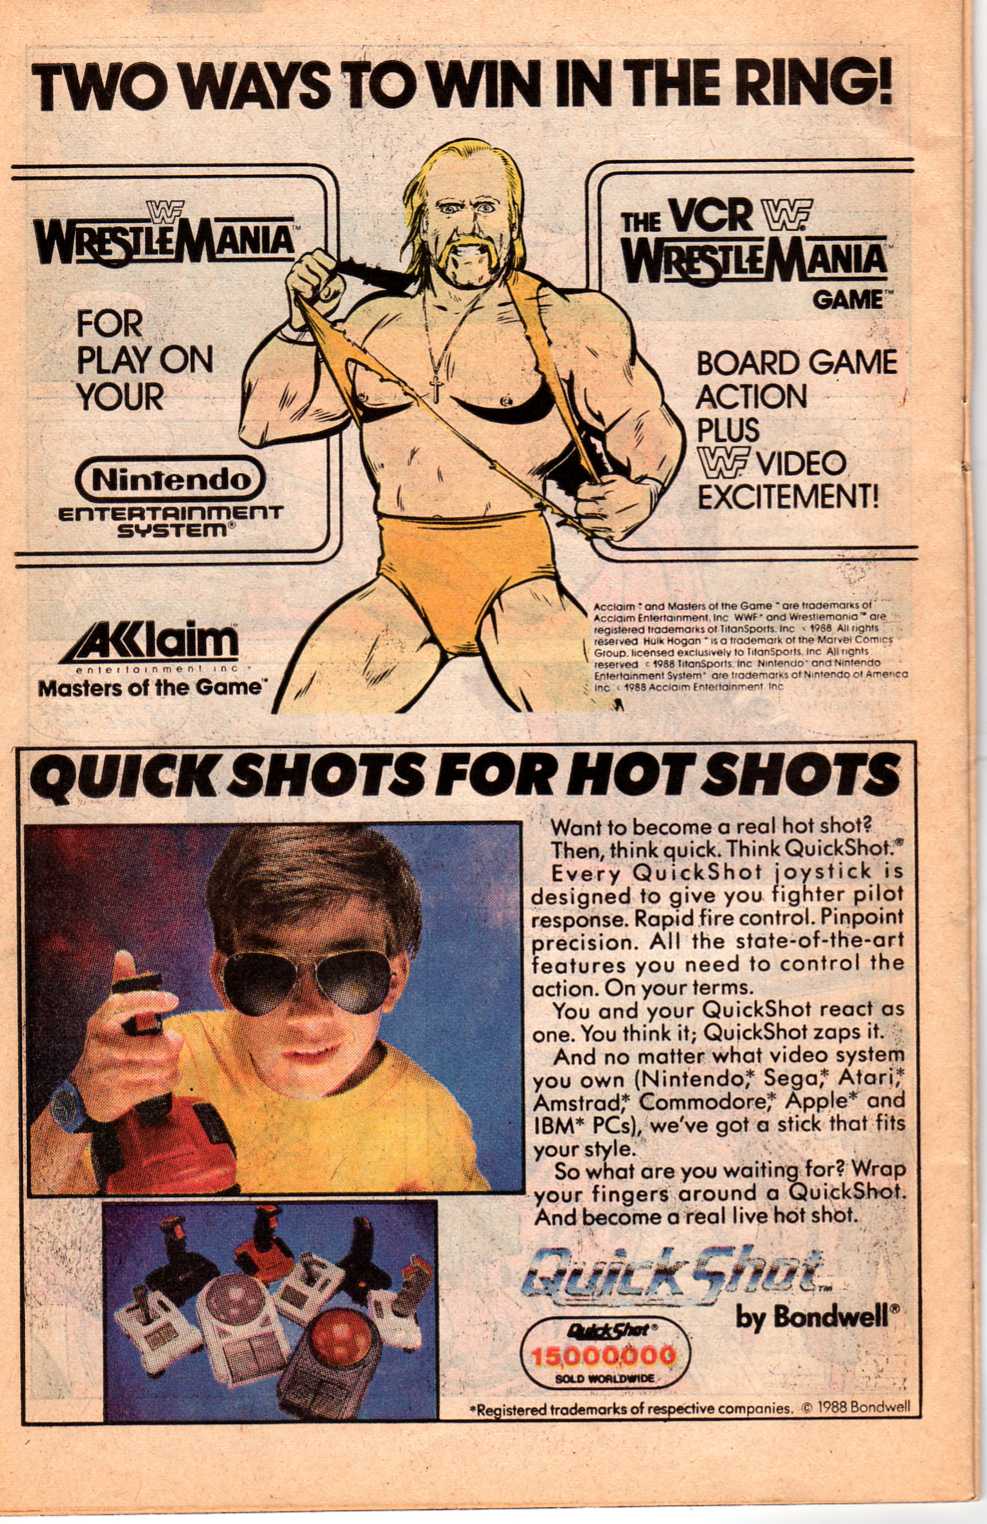 Video Game Ads Part 2